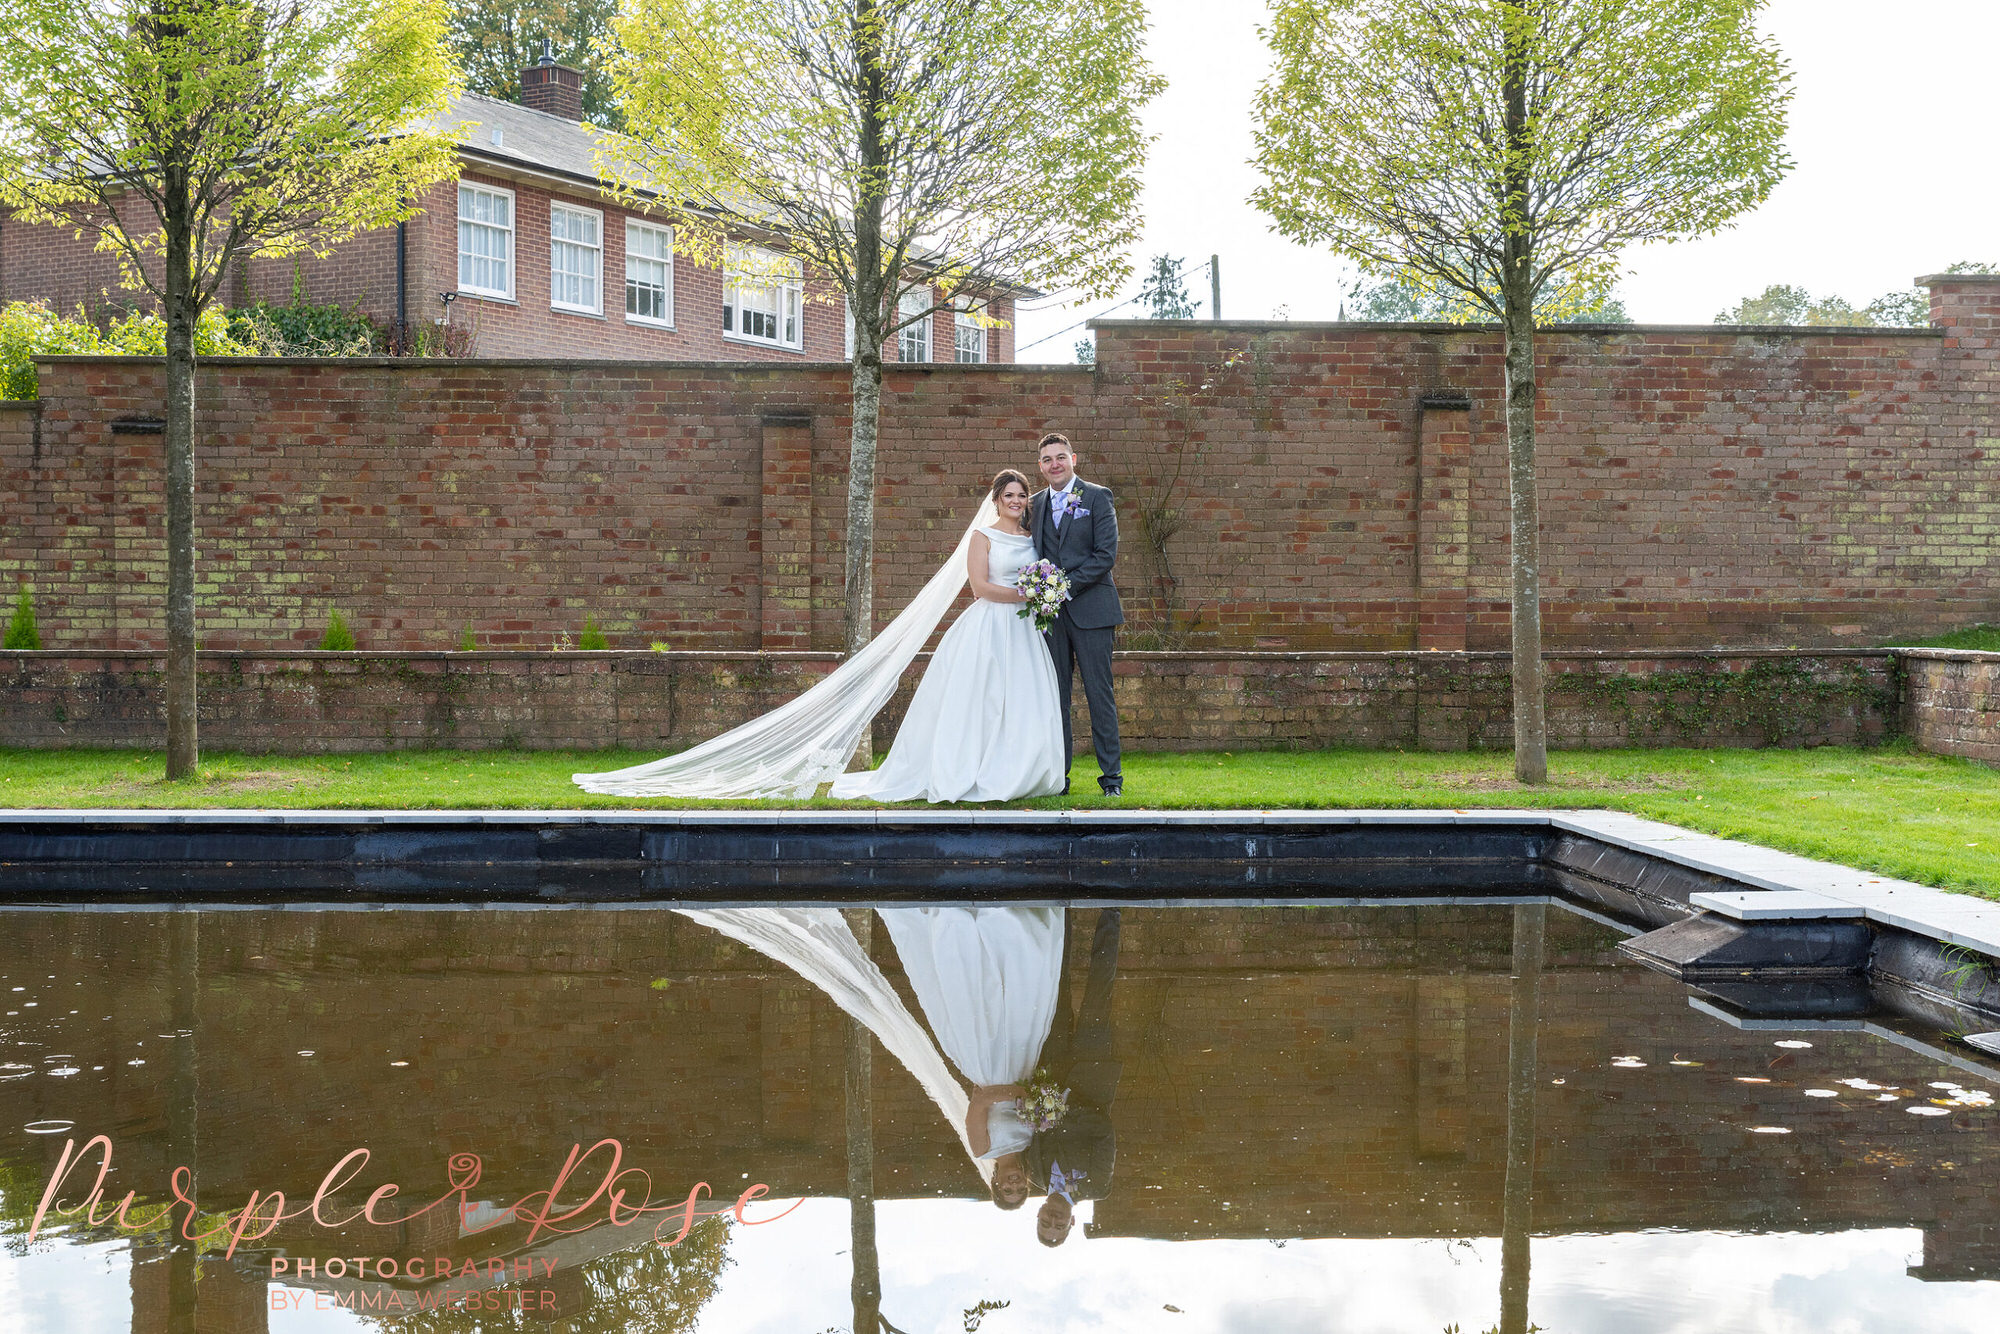 Bride and groom by a pond